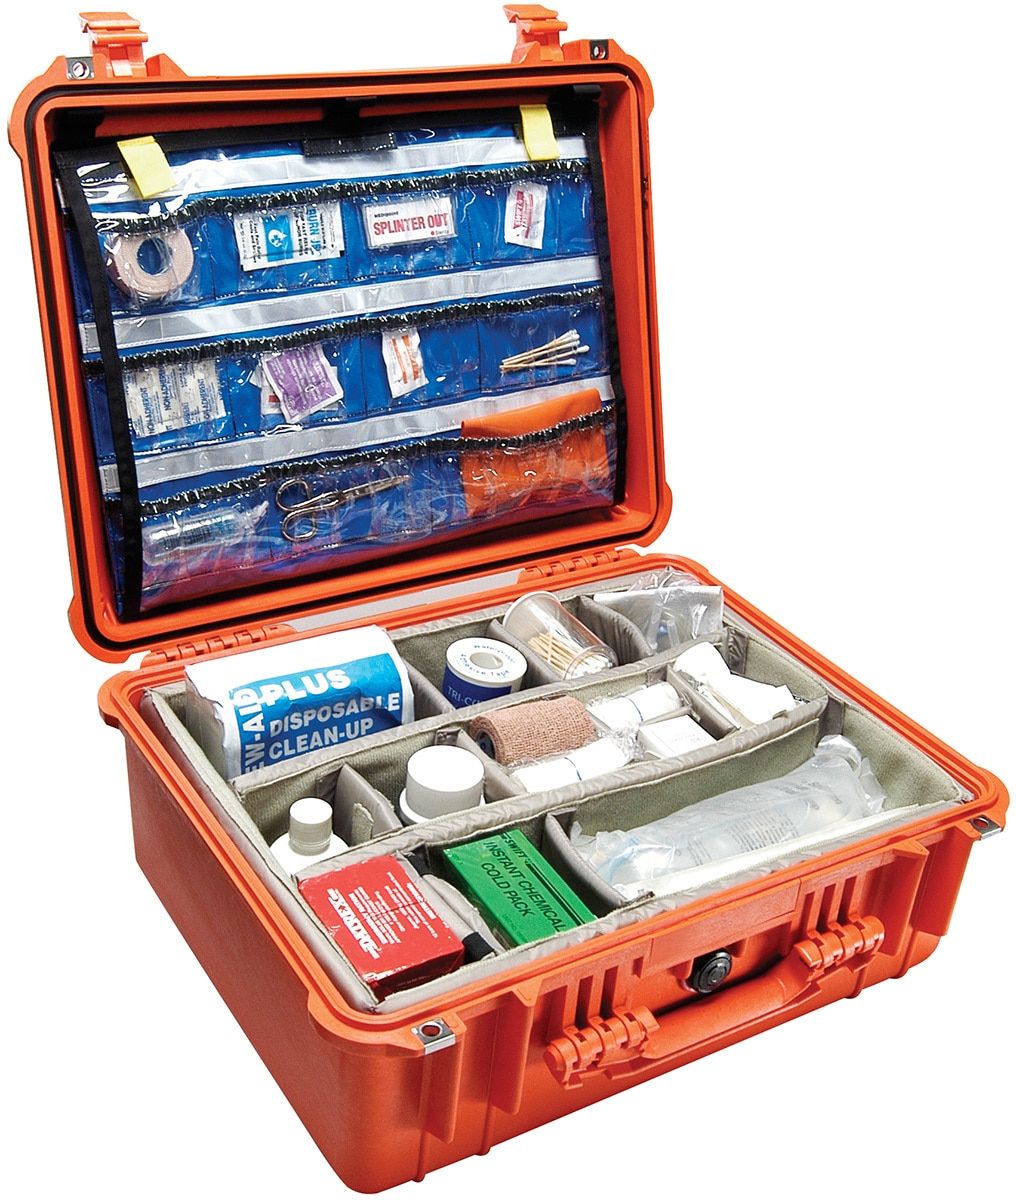 Have a First Aid Kit and Stock With Supplies